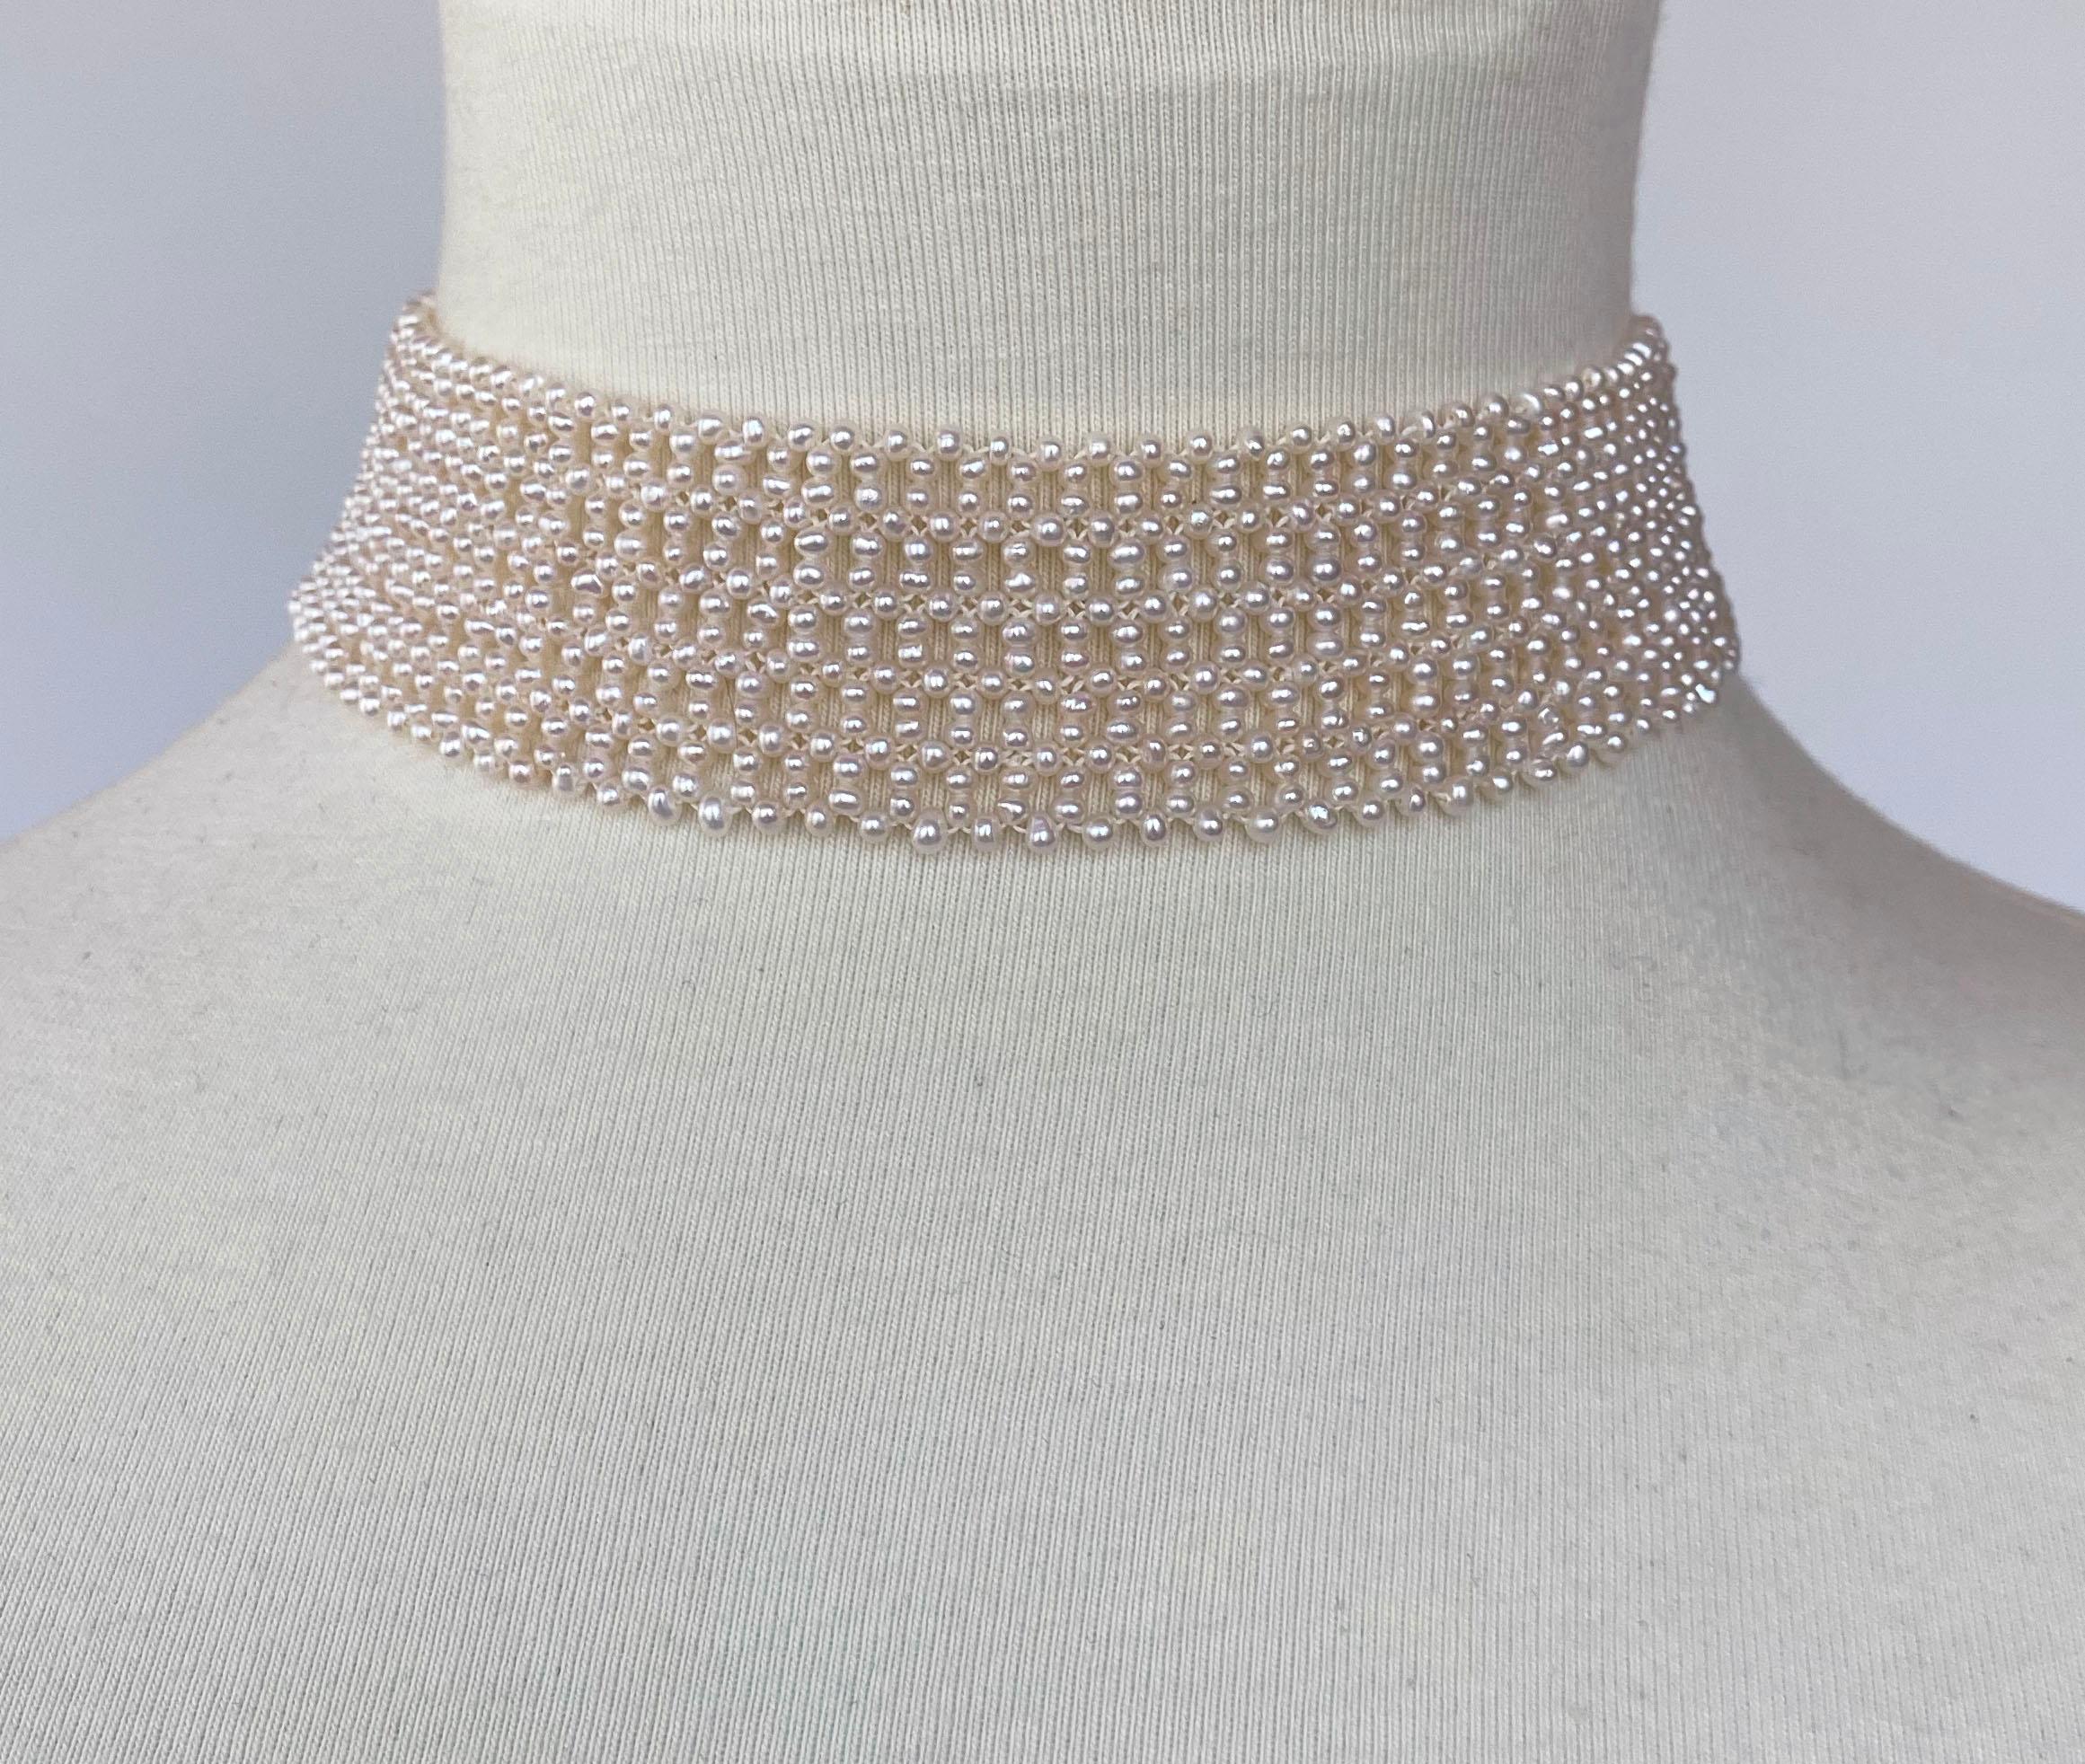 This elegant white seed pearl choker was woven with 1.5mm pearls. The intricately hand-woven piece has a delicate lace-like design. The choker is 1.25 inch wide and 13.5 inches long. The sturdy sliding silver clasp is gold plated . This piece can